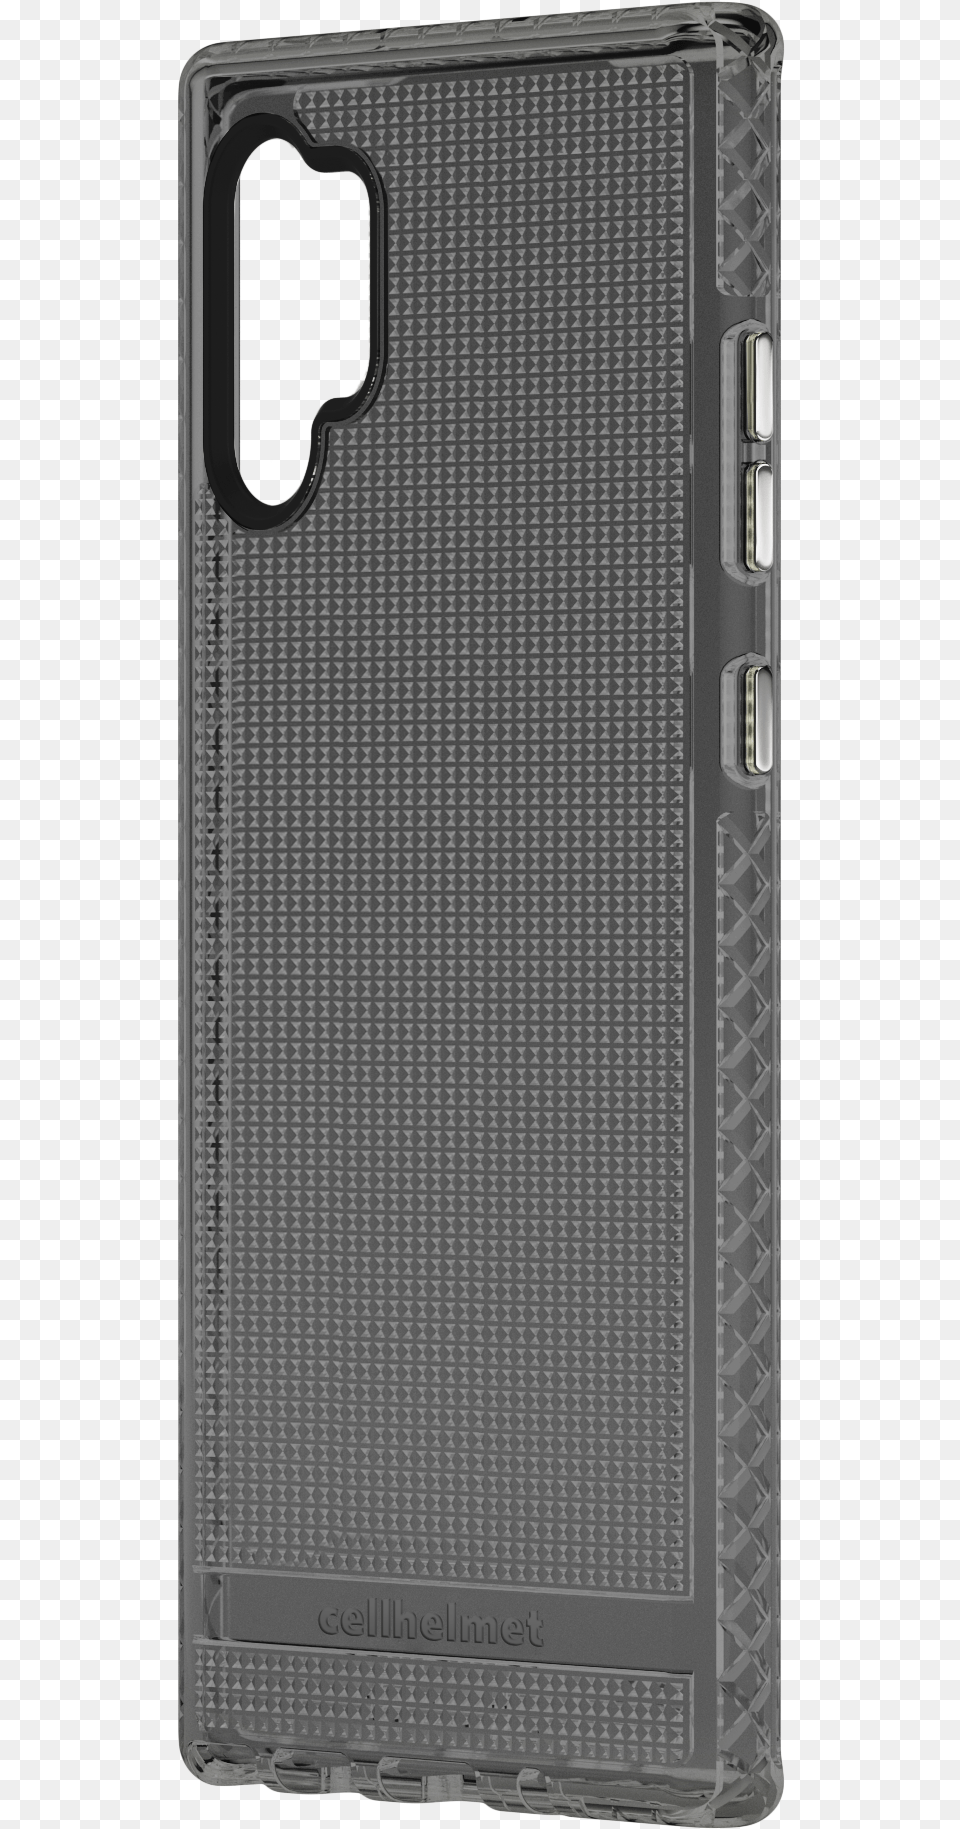 Altitude X Pro Series For Samsung Galaxy Note 10 Plus Mobile Phone Case, Electronics, Mobile Phone Png